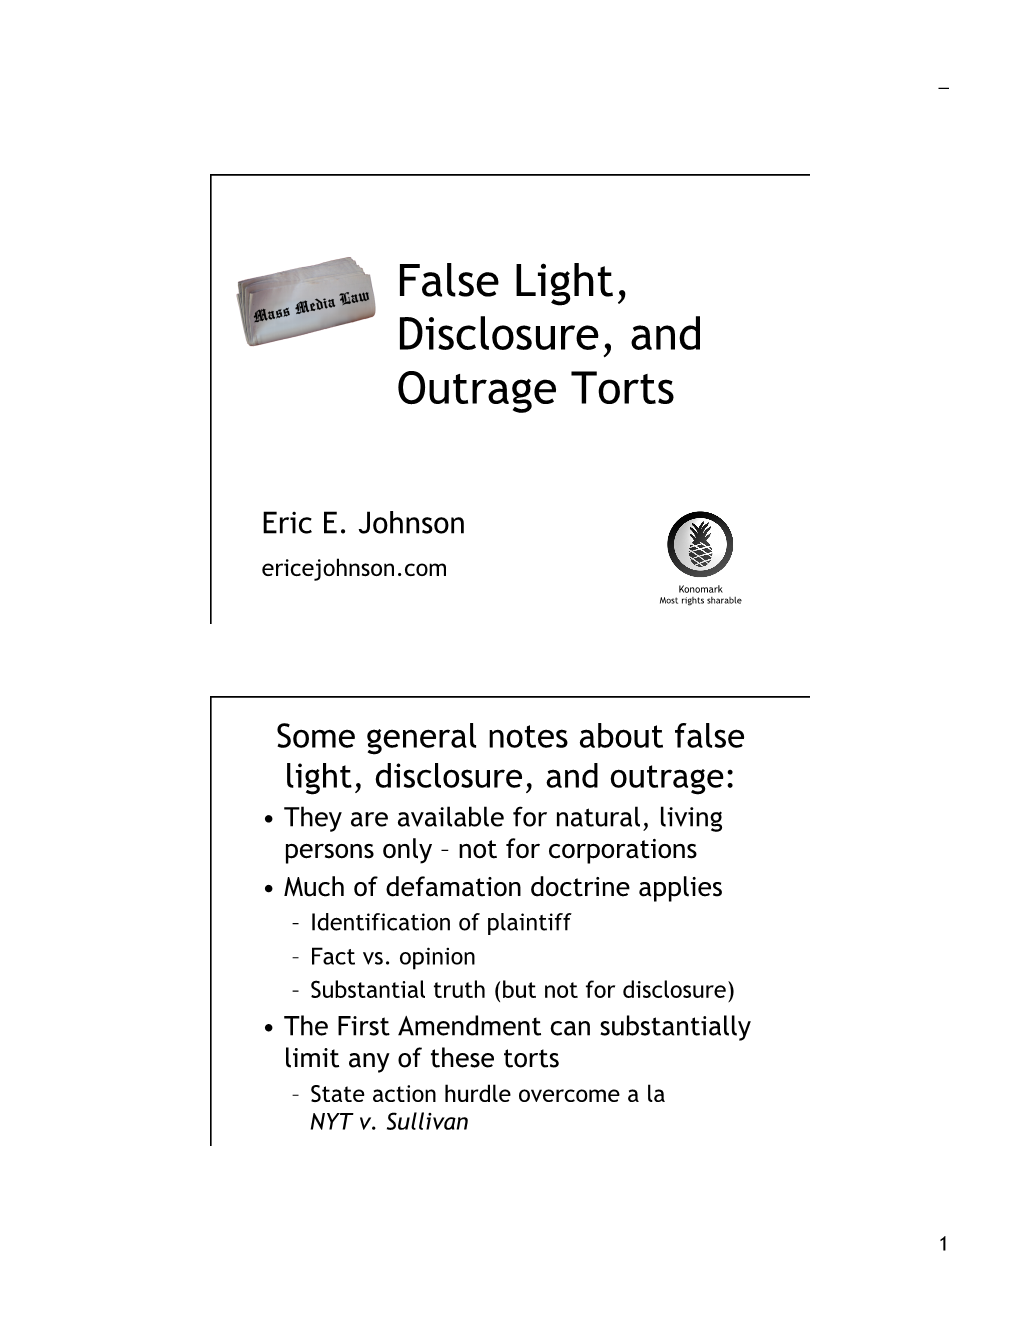 False Light, Disclosure, and Outrage Torts